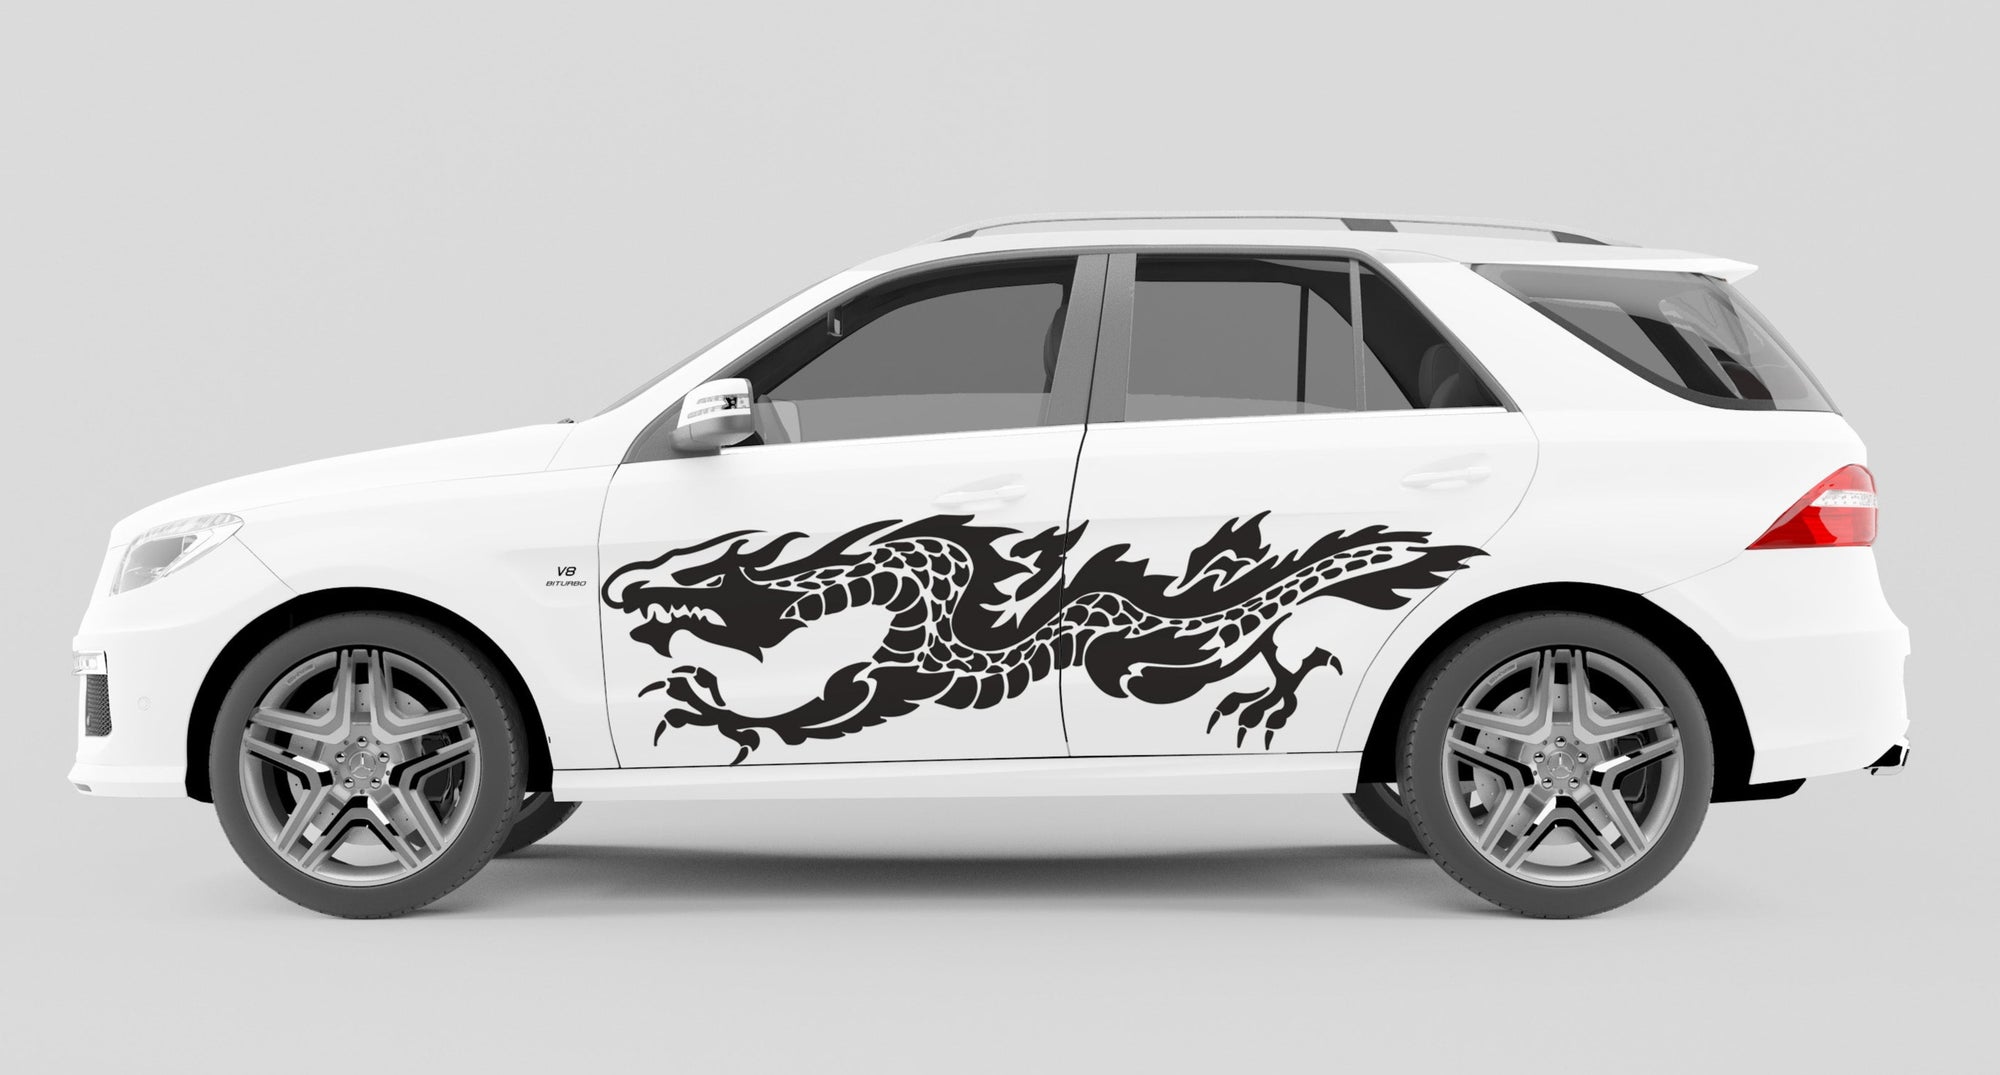 Black flaming dragon vinyl decal on the side of white SUV